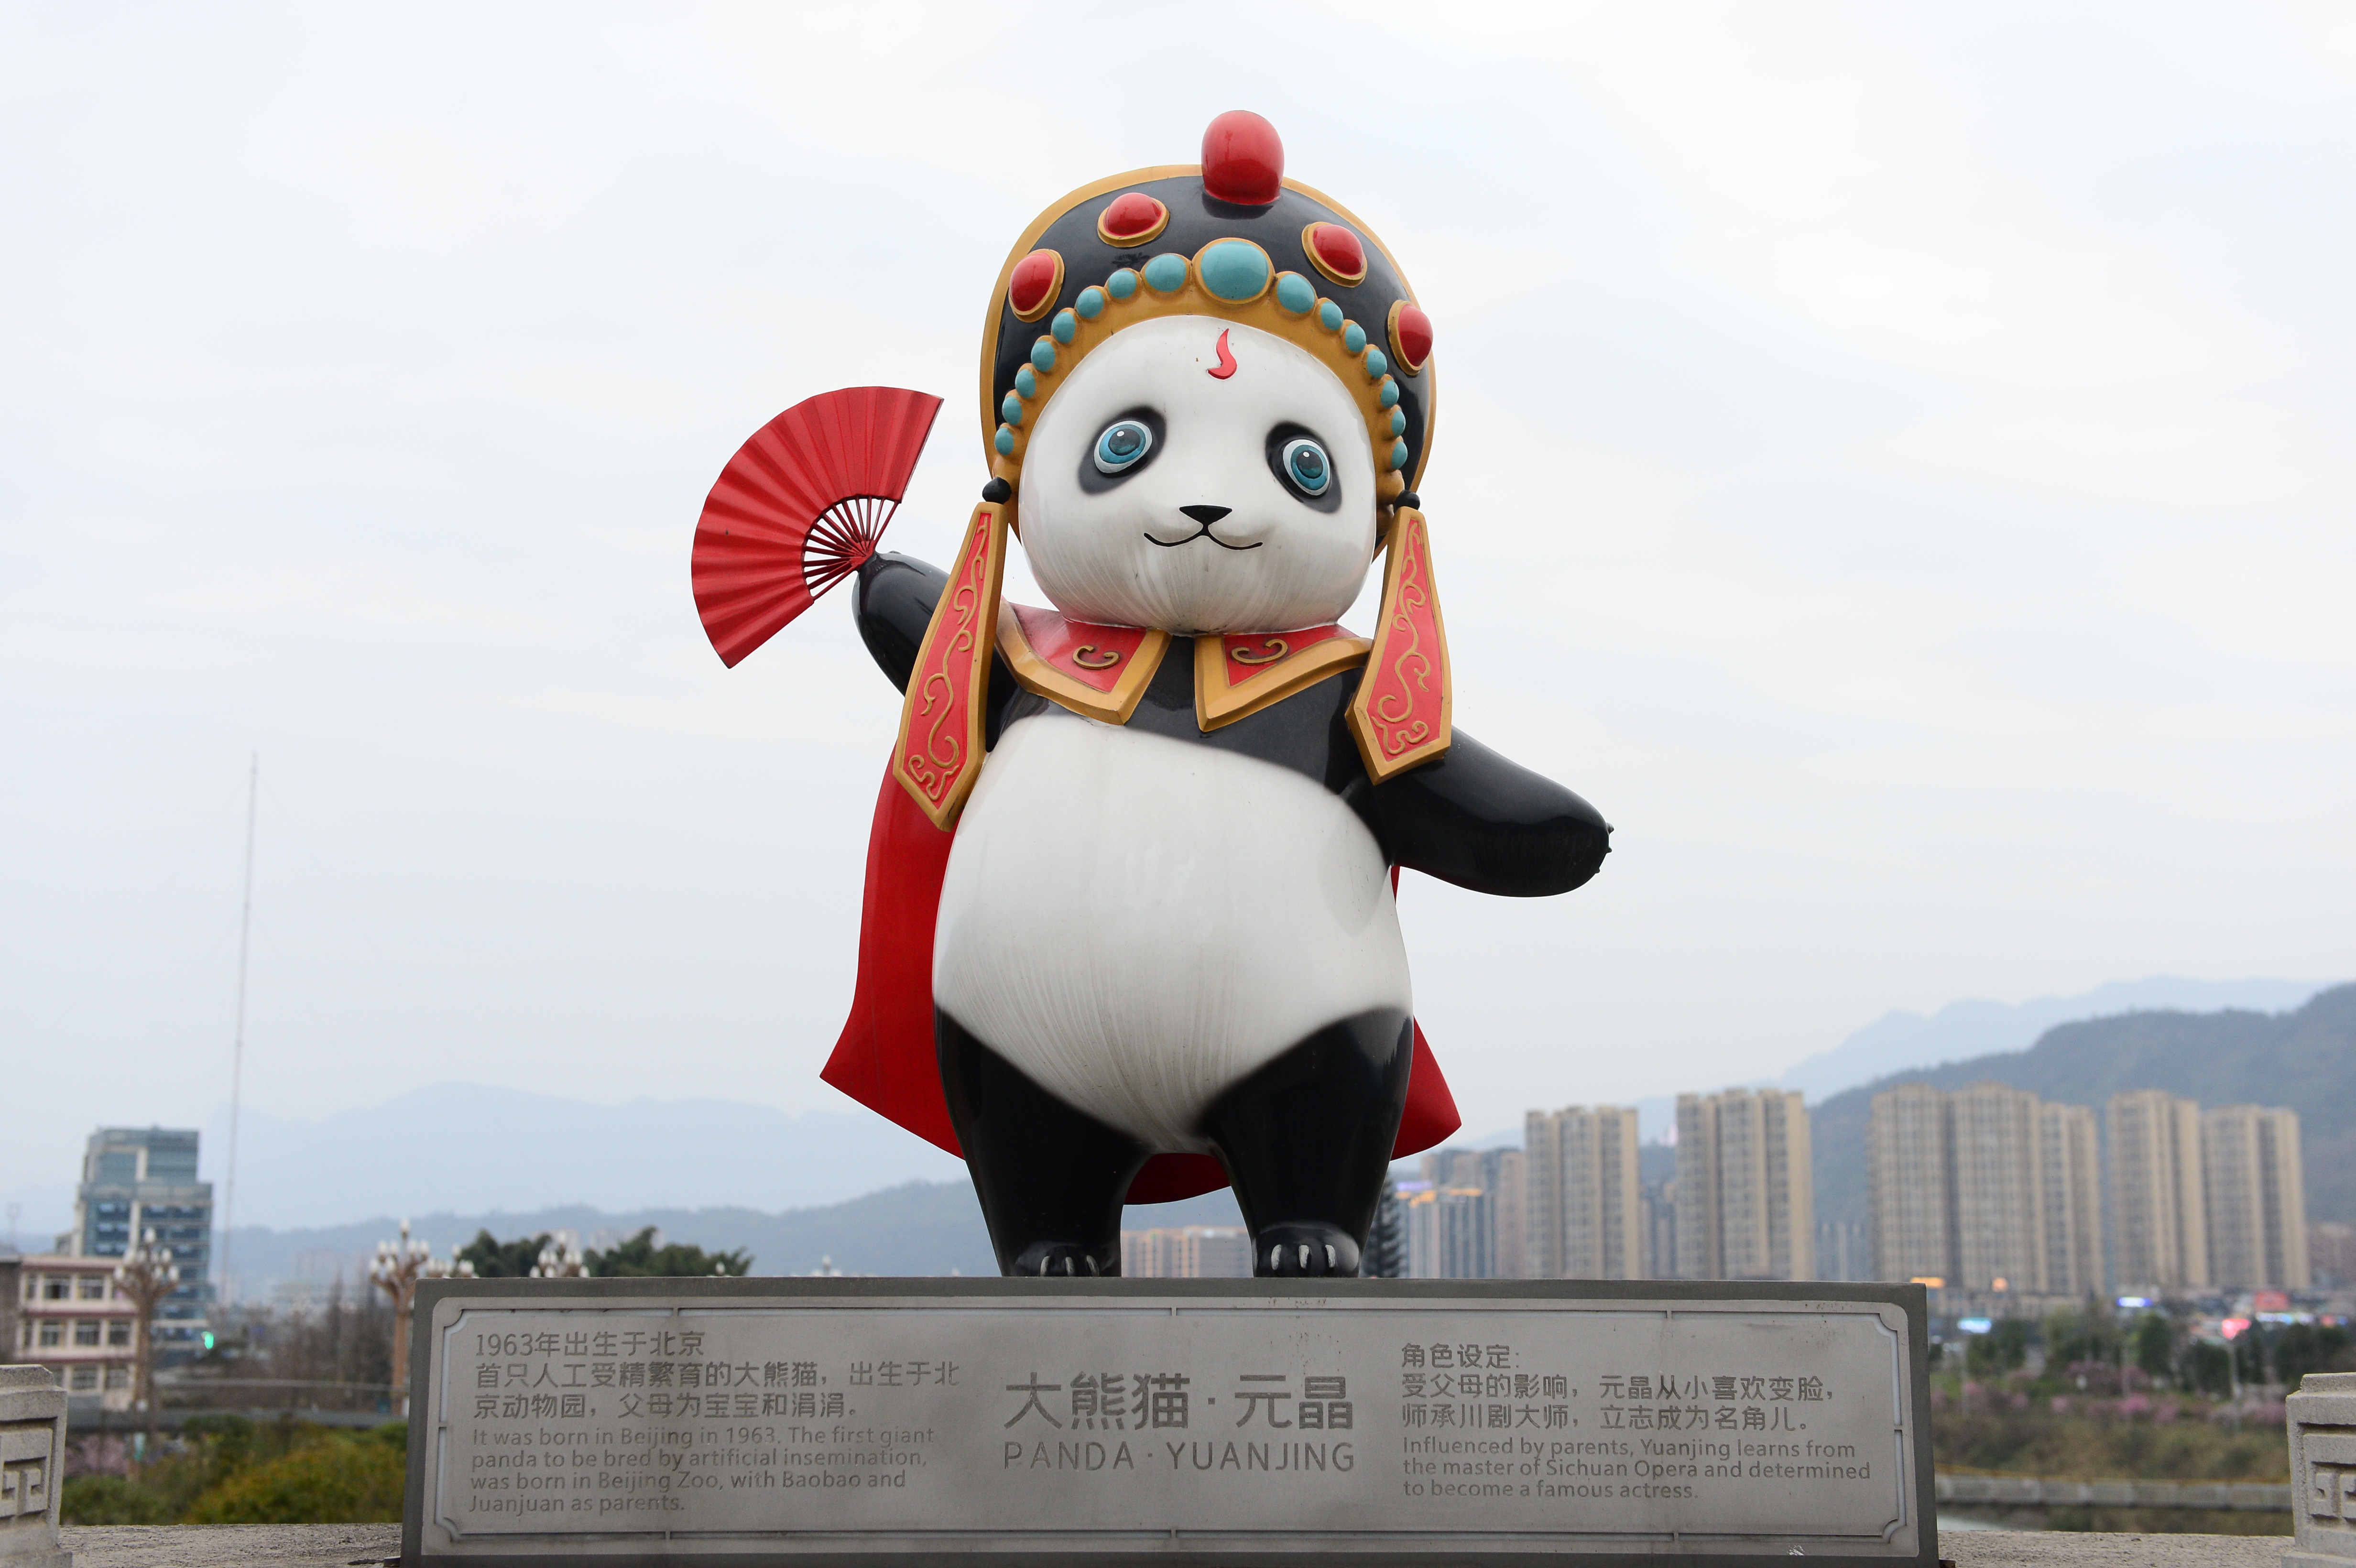 A sculpture of the giant panda 